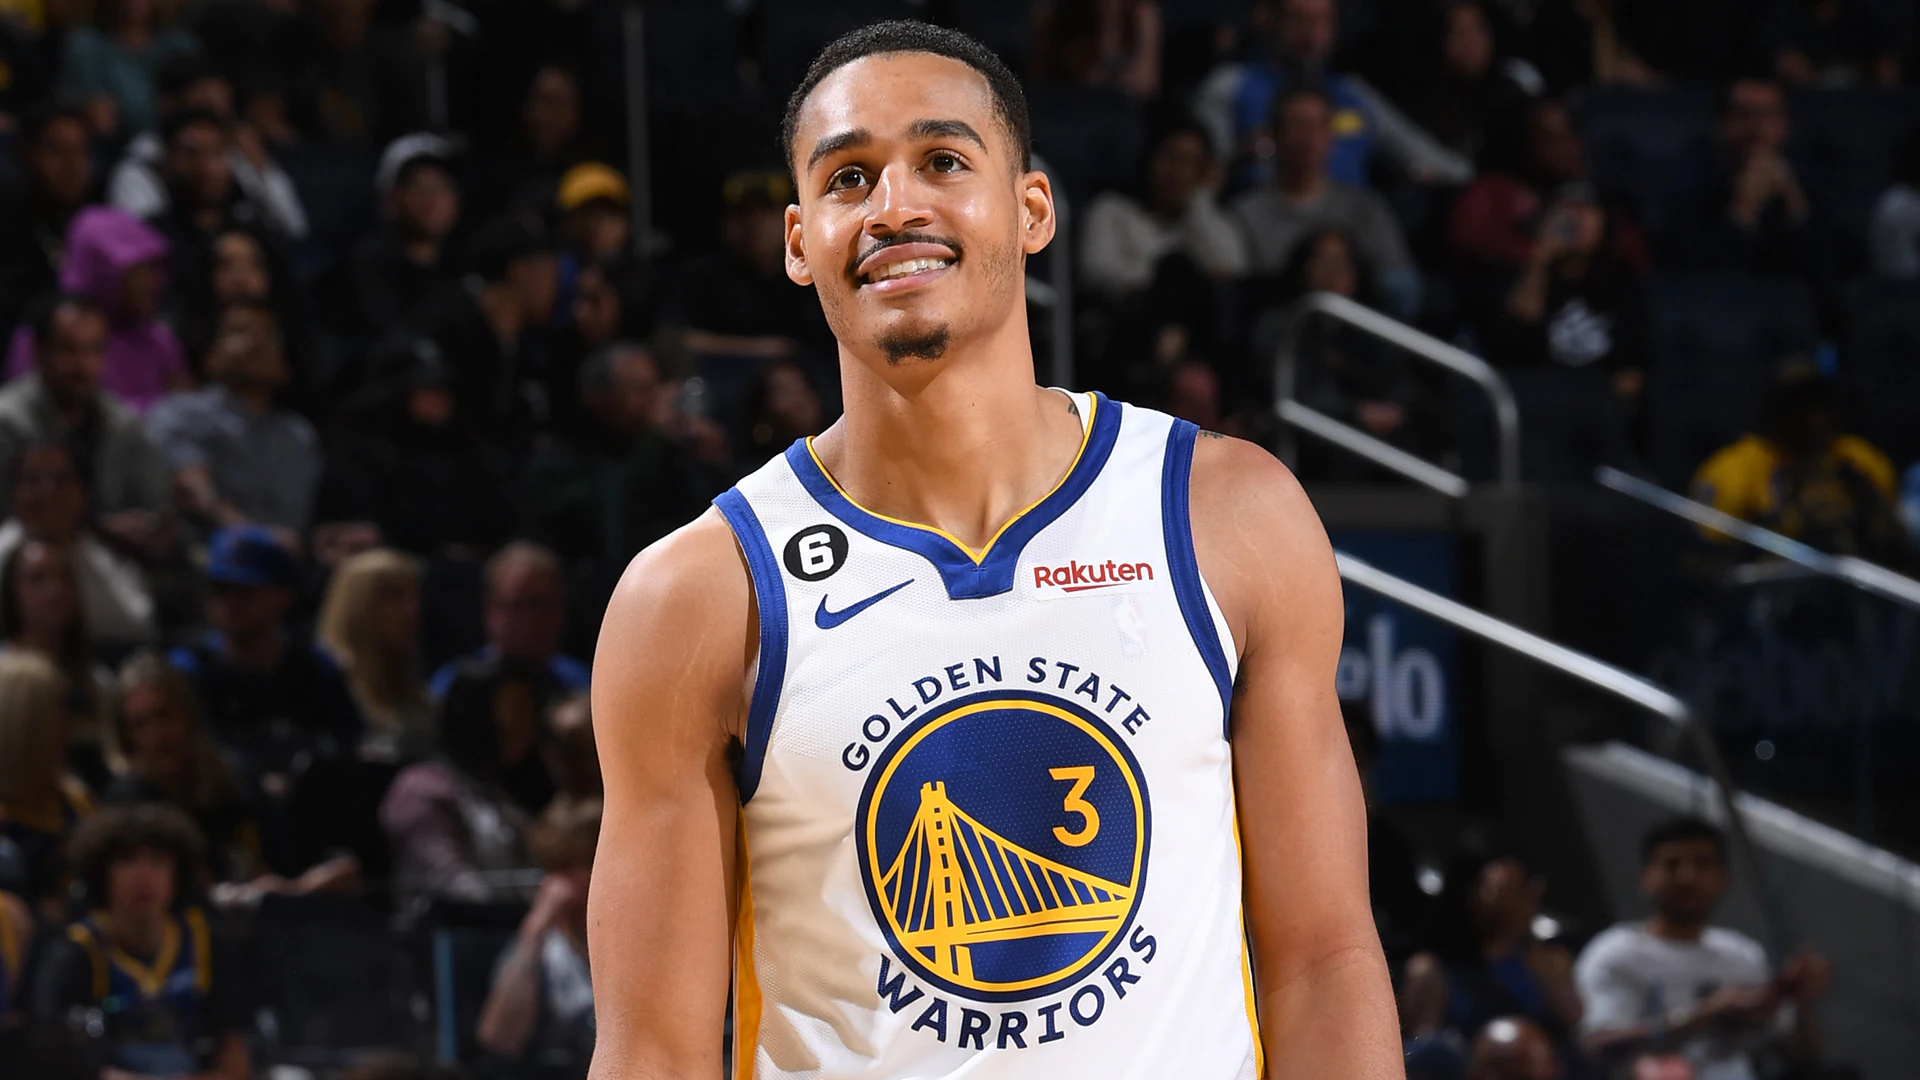 Golden State Warriors detect problem to trade Jordan Poole
	
